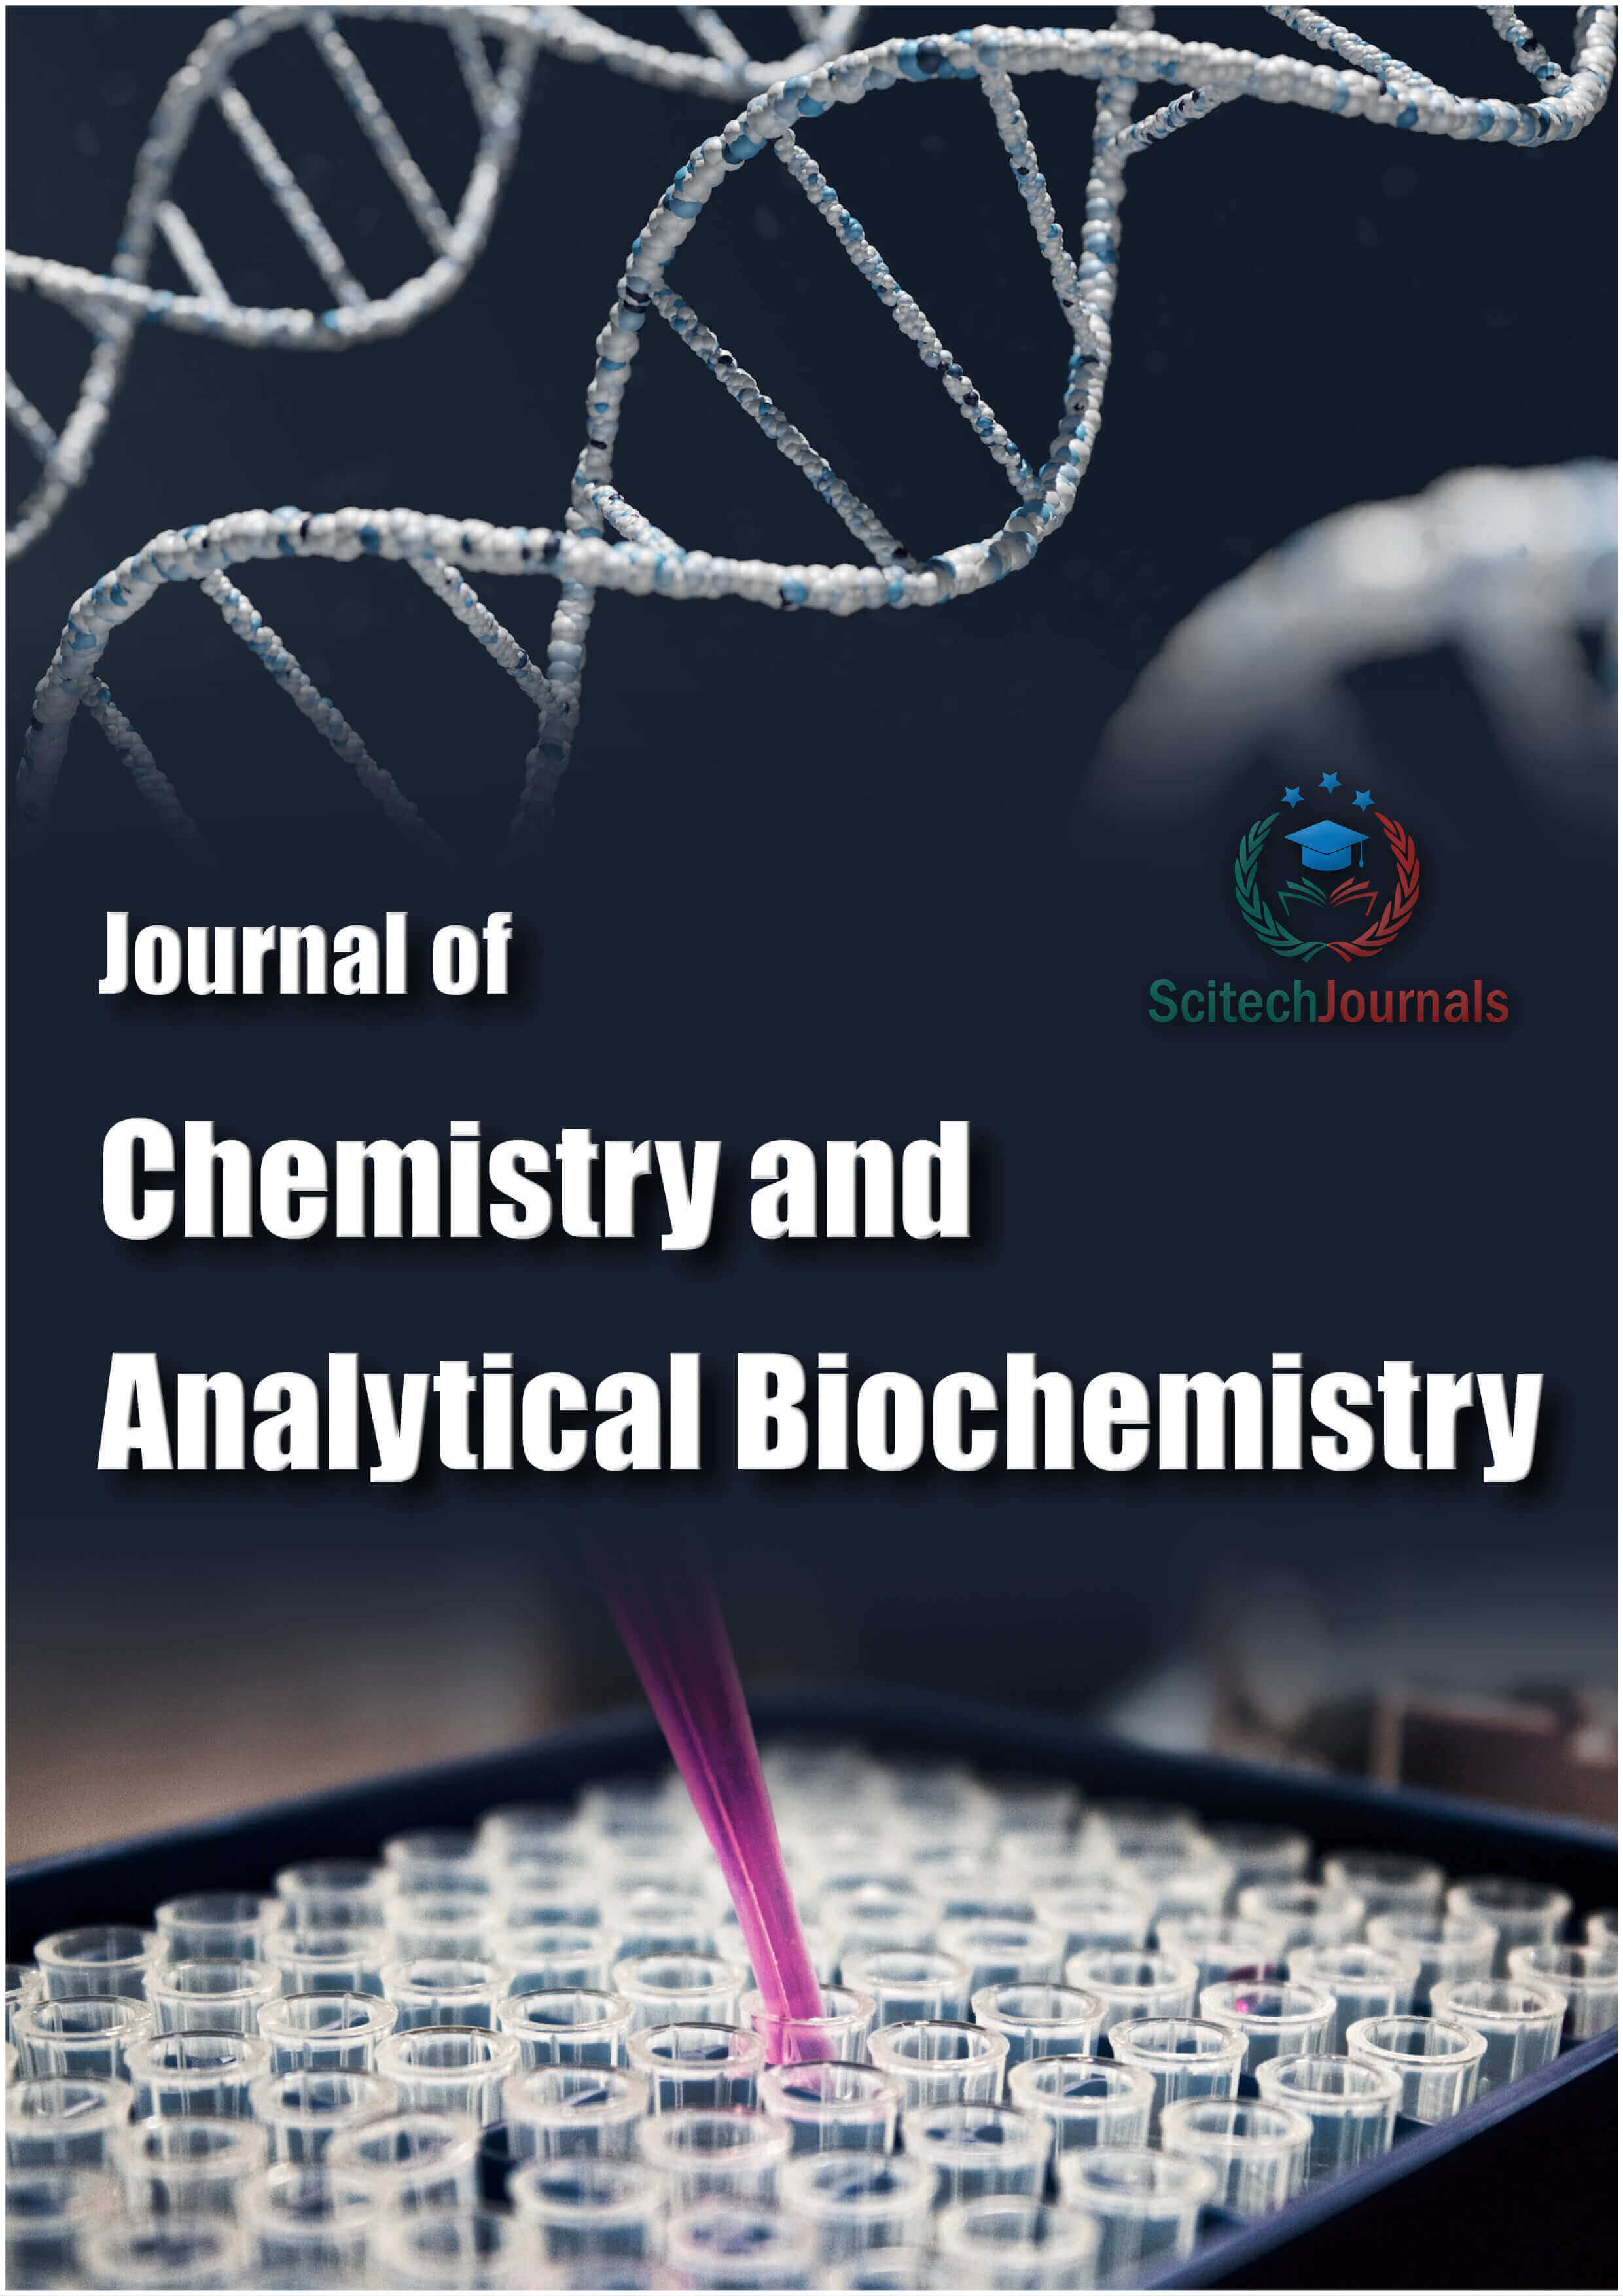 Journal of Chemistry and Analytical Biochemistry